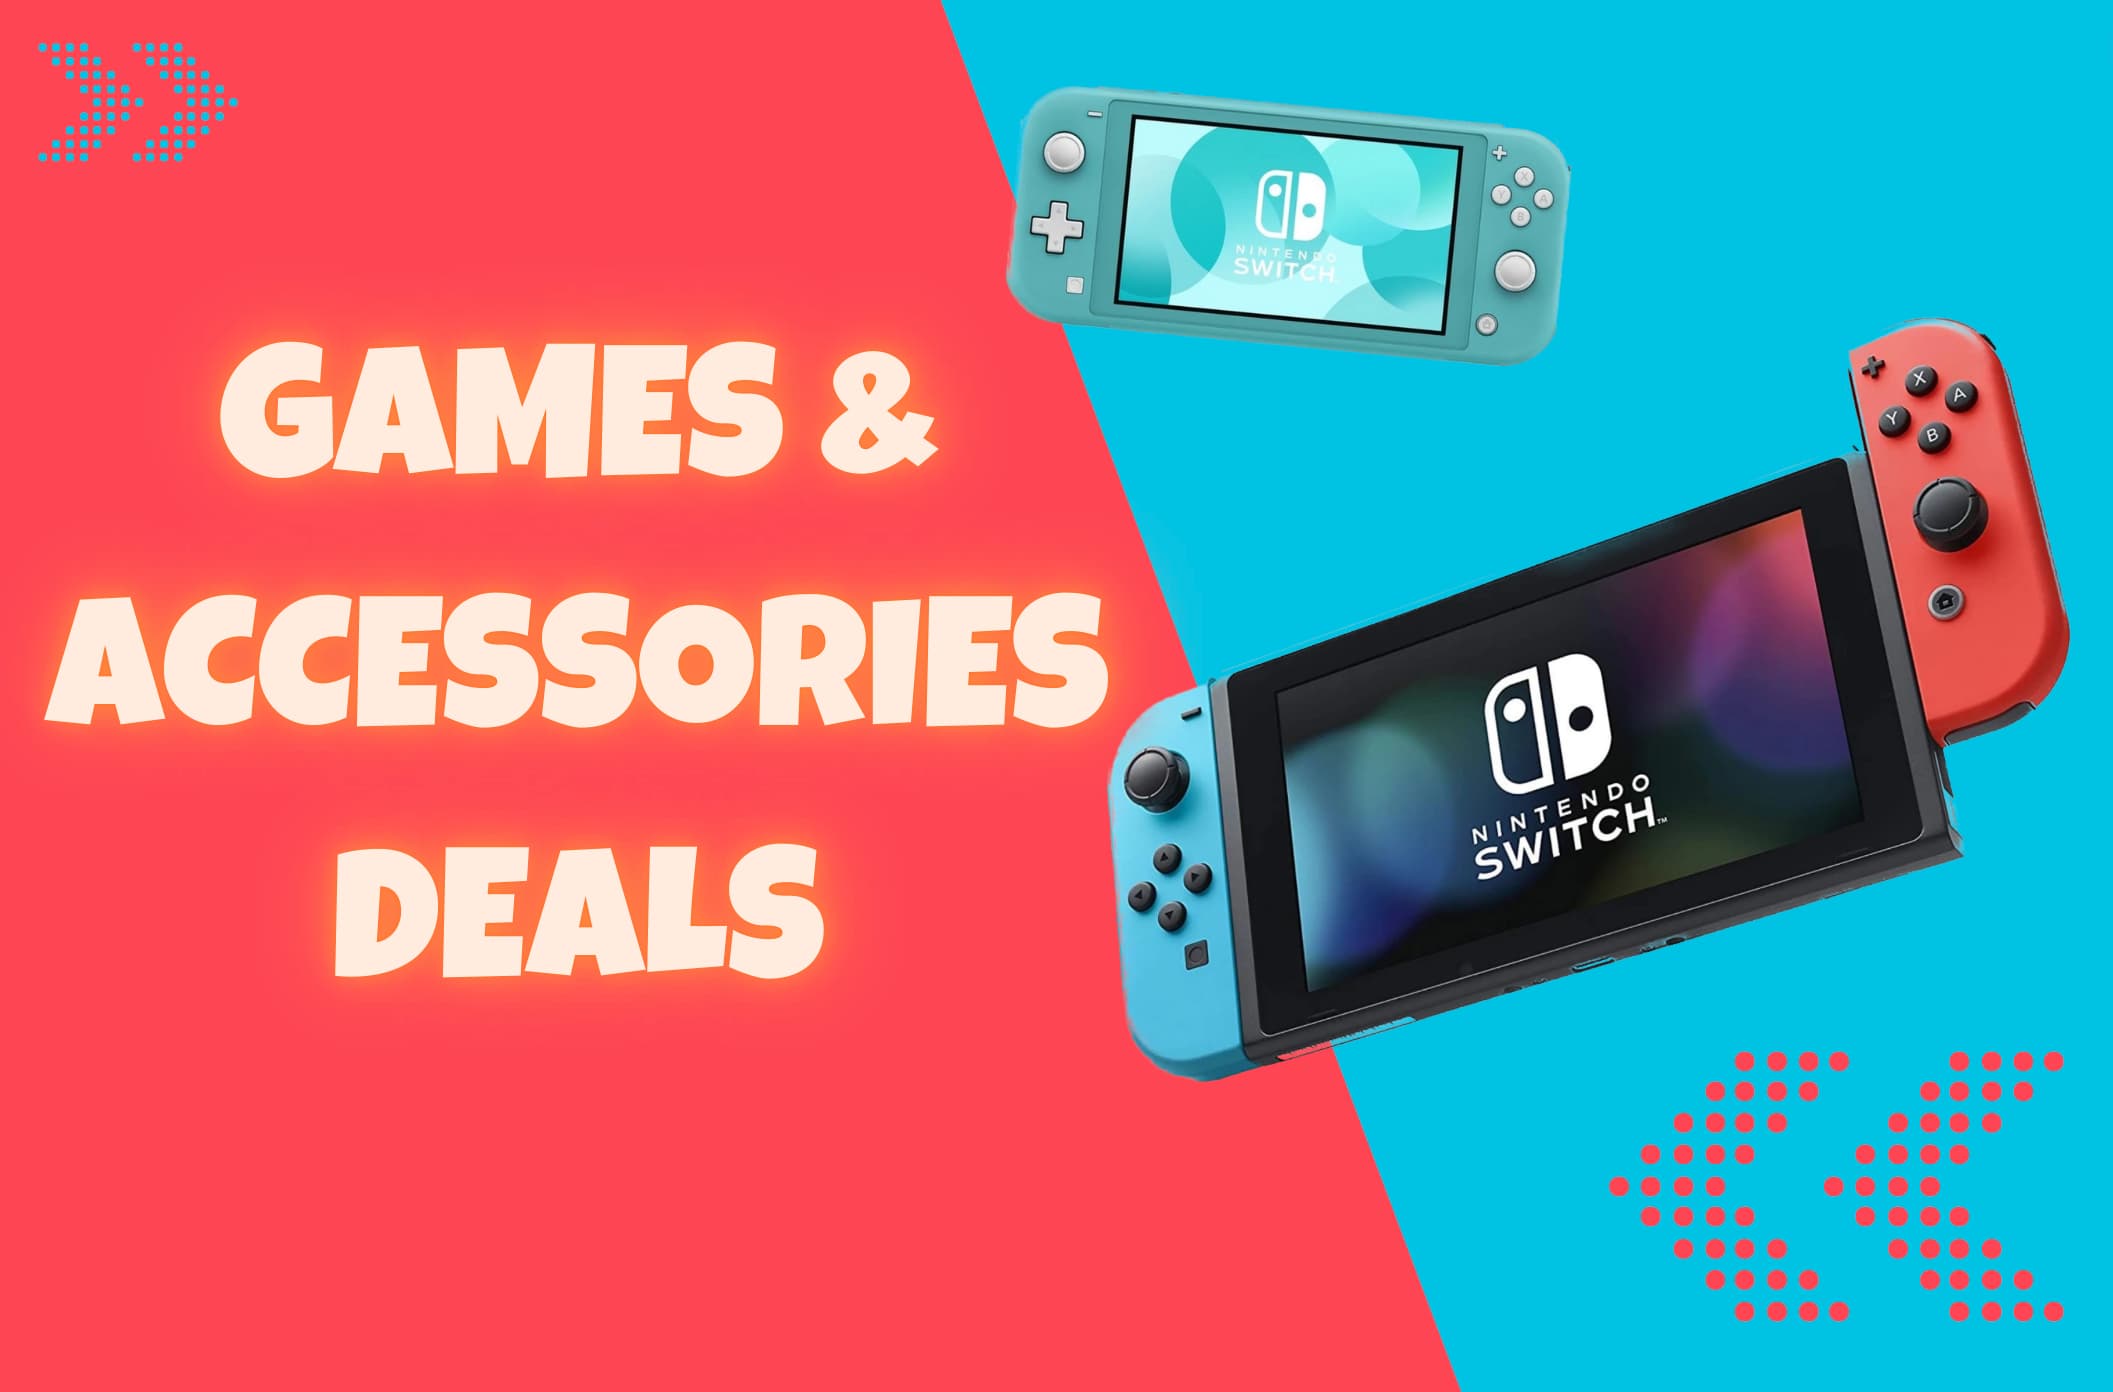 Miss Cyber Monday? Here are some Nintendo Switch deals to compensate